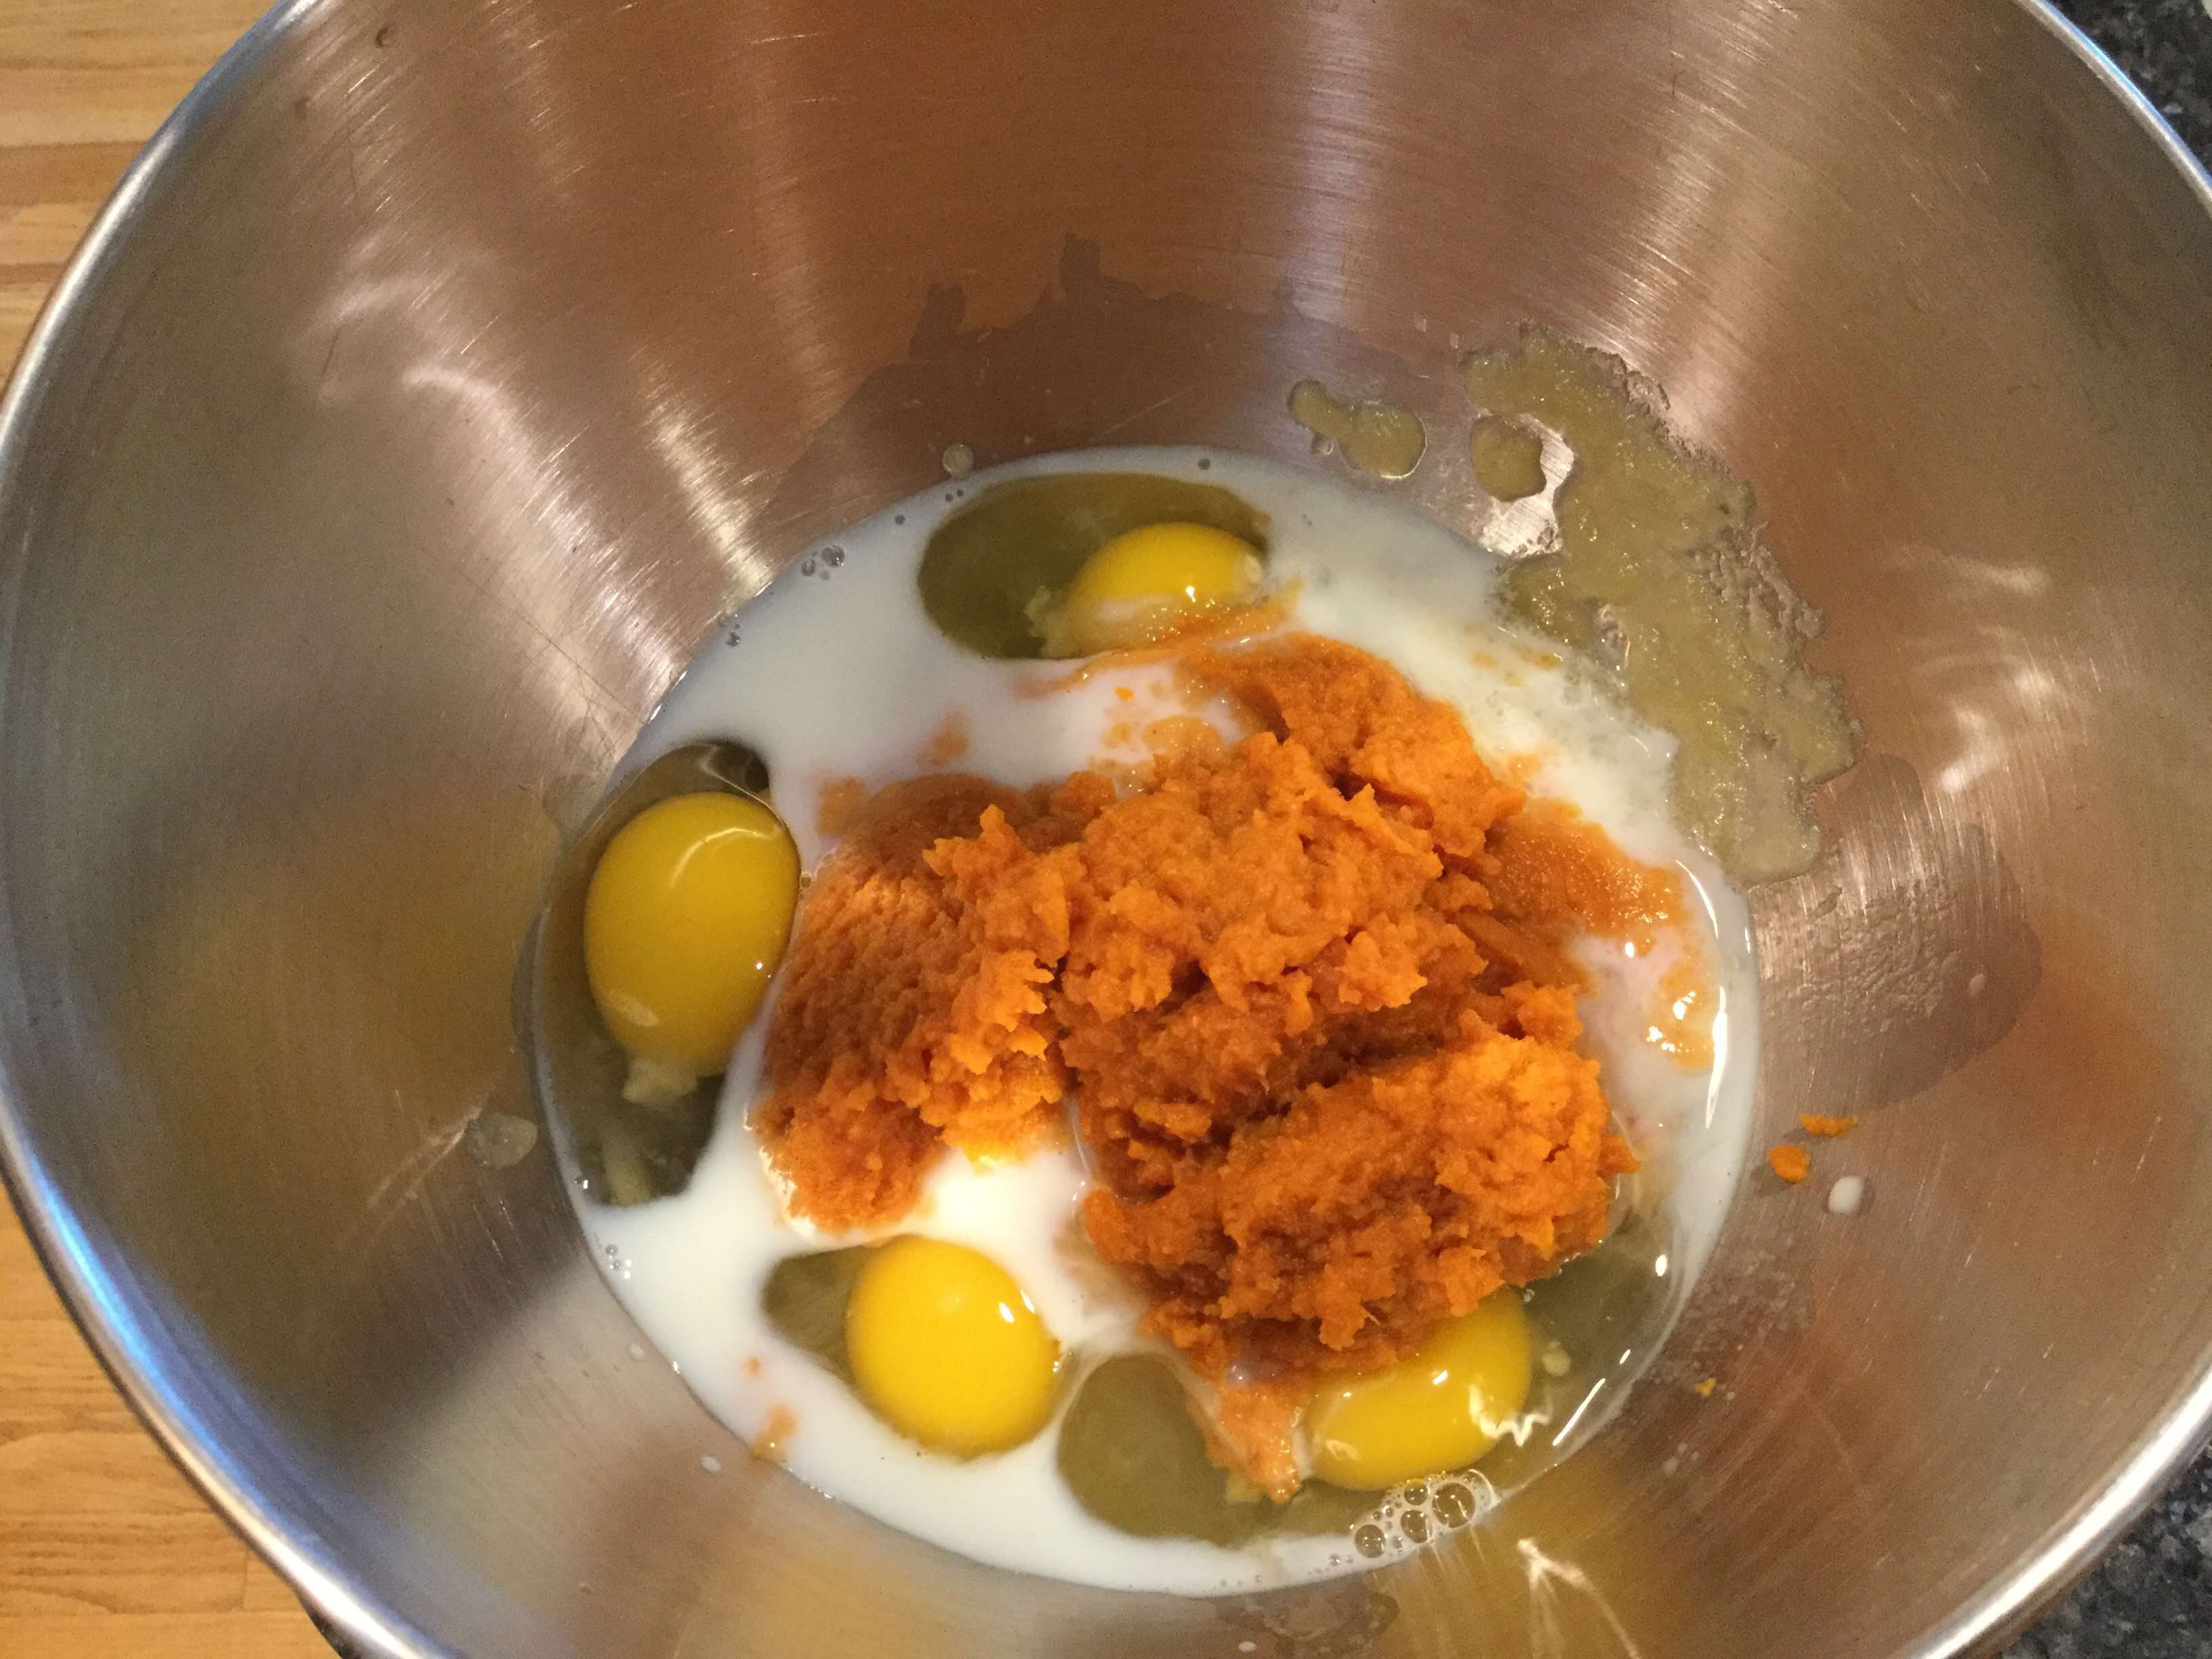 Put your eggs, milk, applesauce, and pumpkin in your mixer bowl (you are more than welcome to mix by hand).